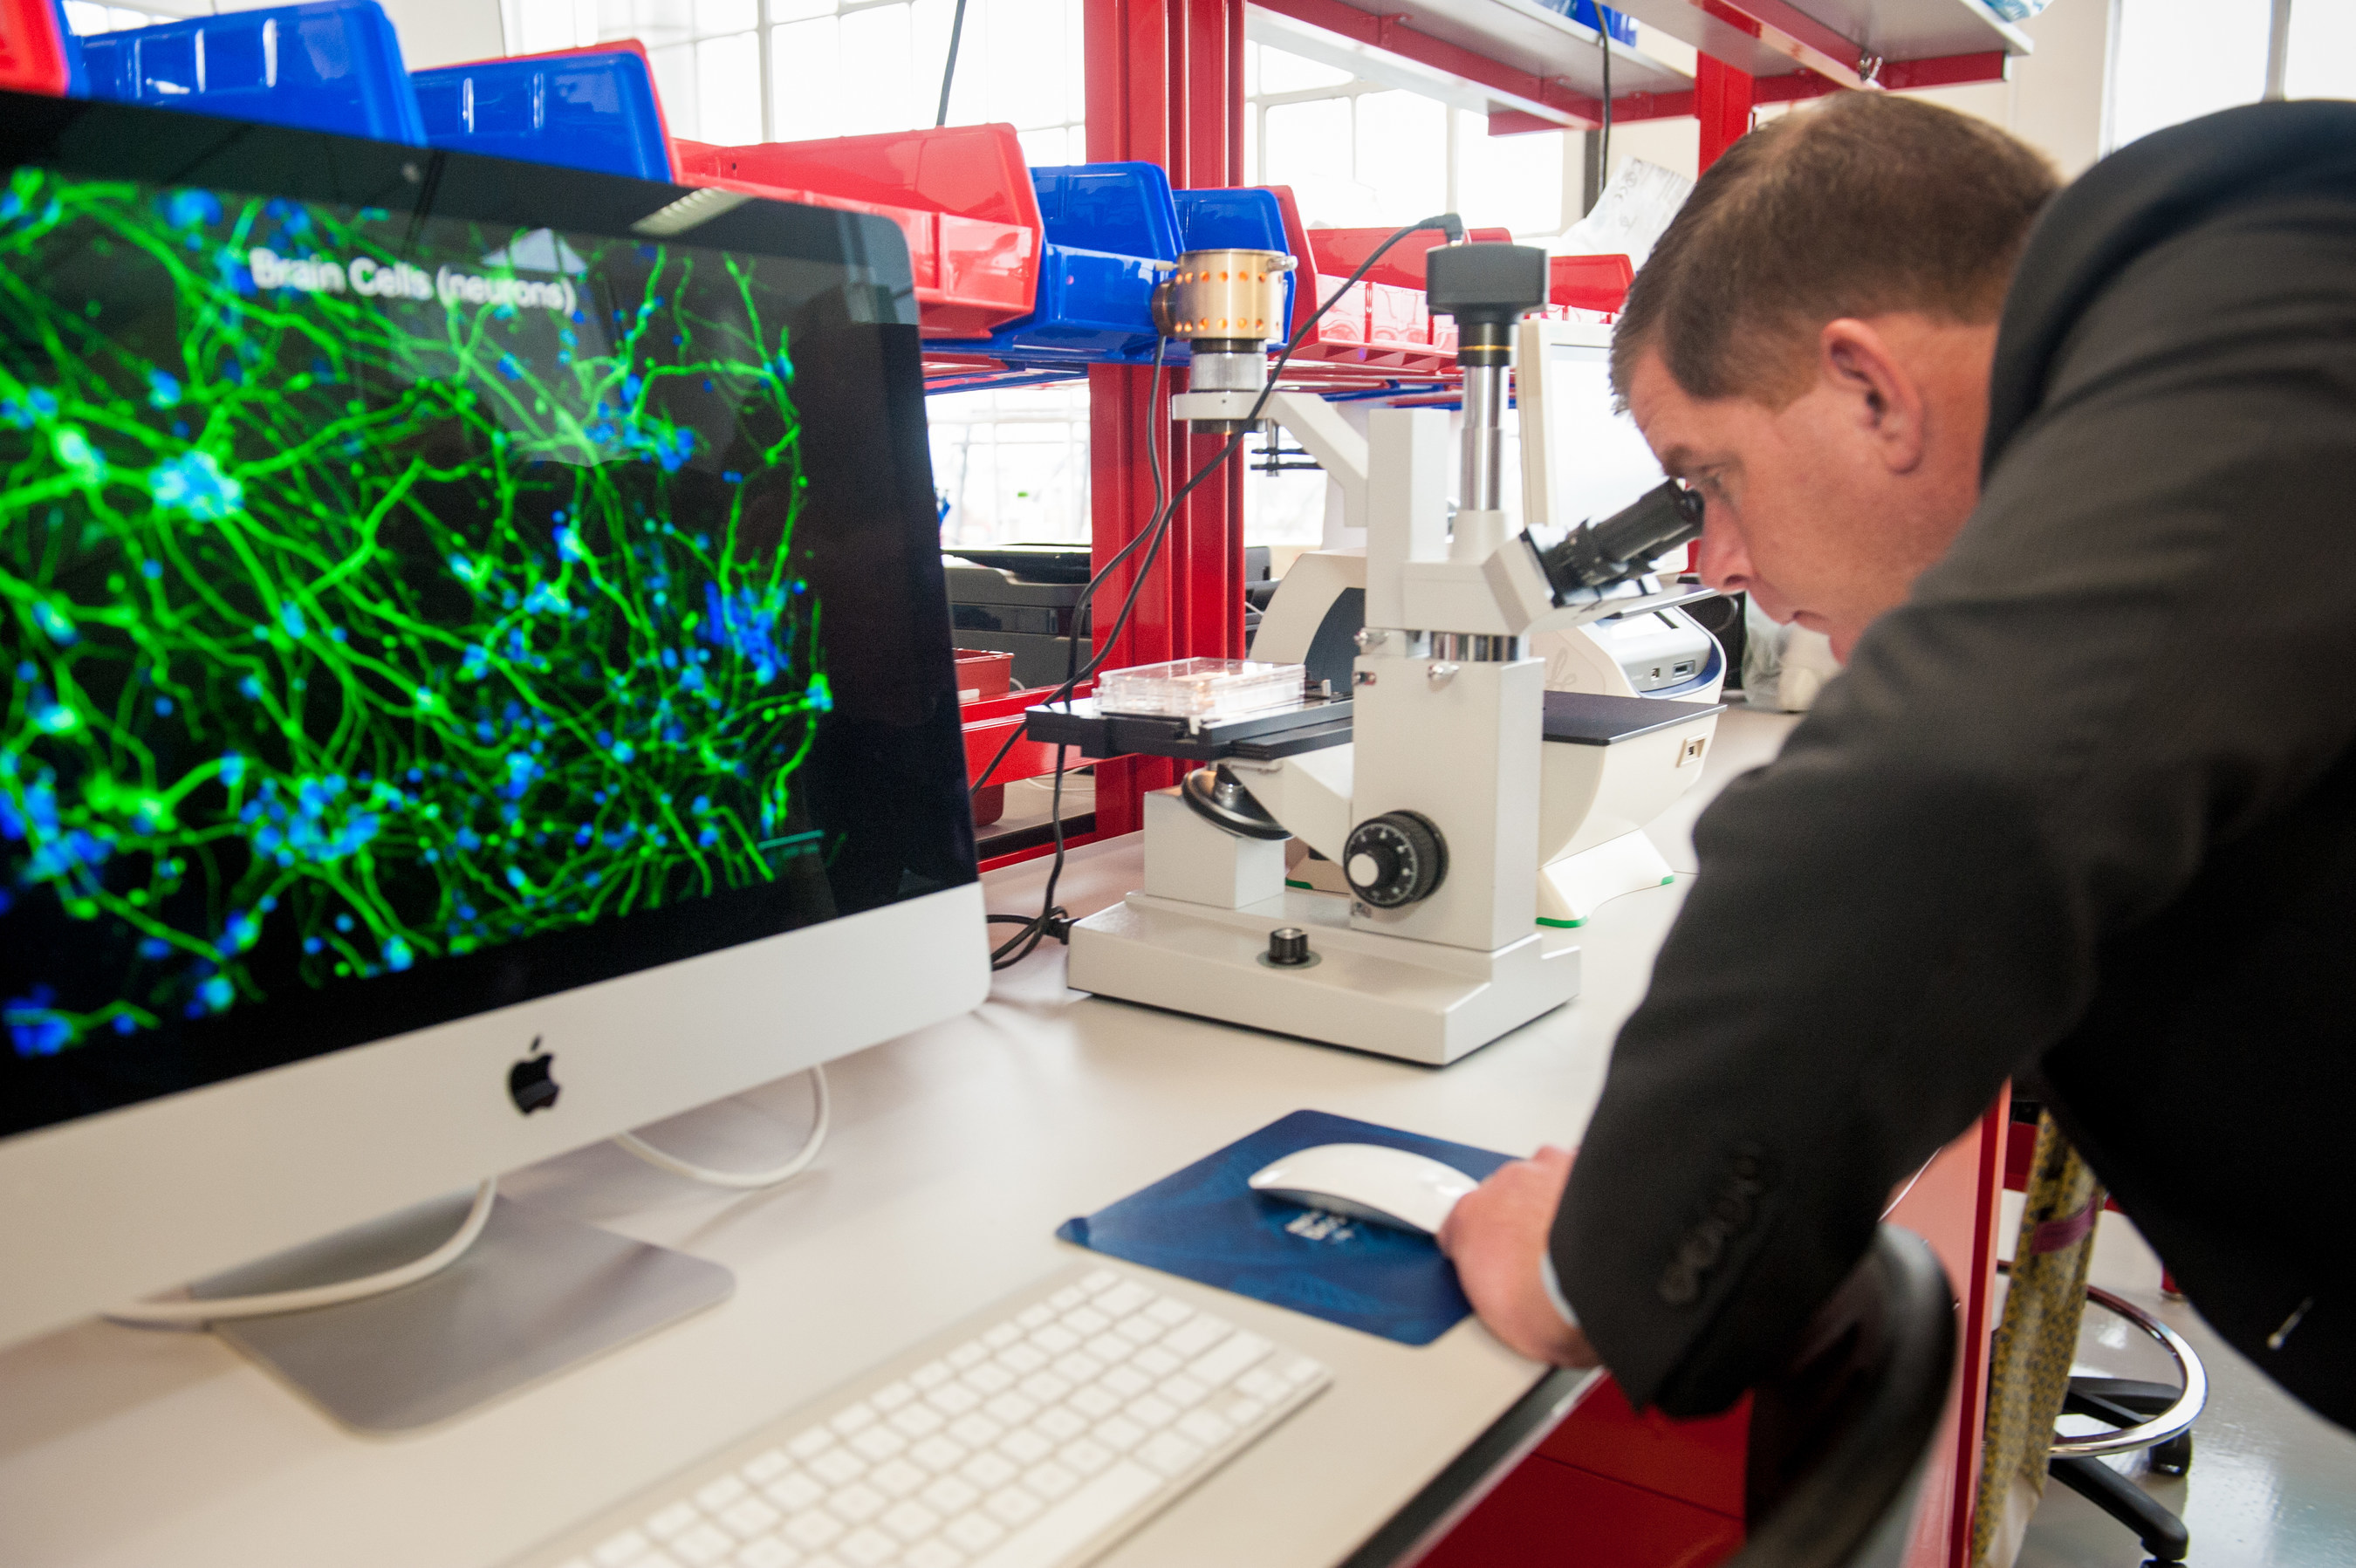 Boston Mayor Martin J. Walsh viewed beating heart cells created with induced pluripotent stem cell technology during a tour of ORIG3N's new regenerative medicine lab.